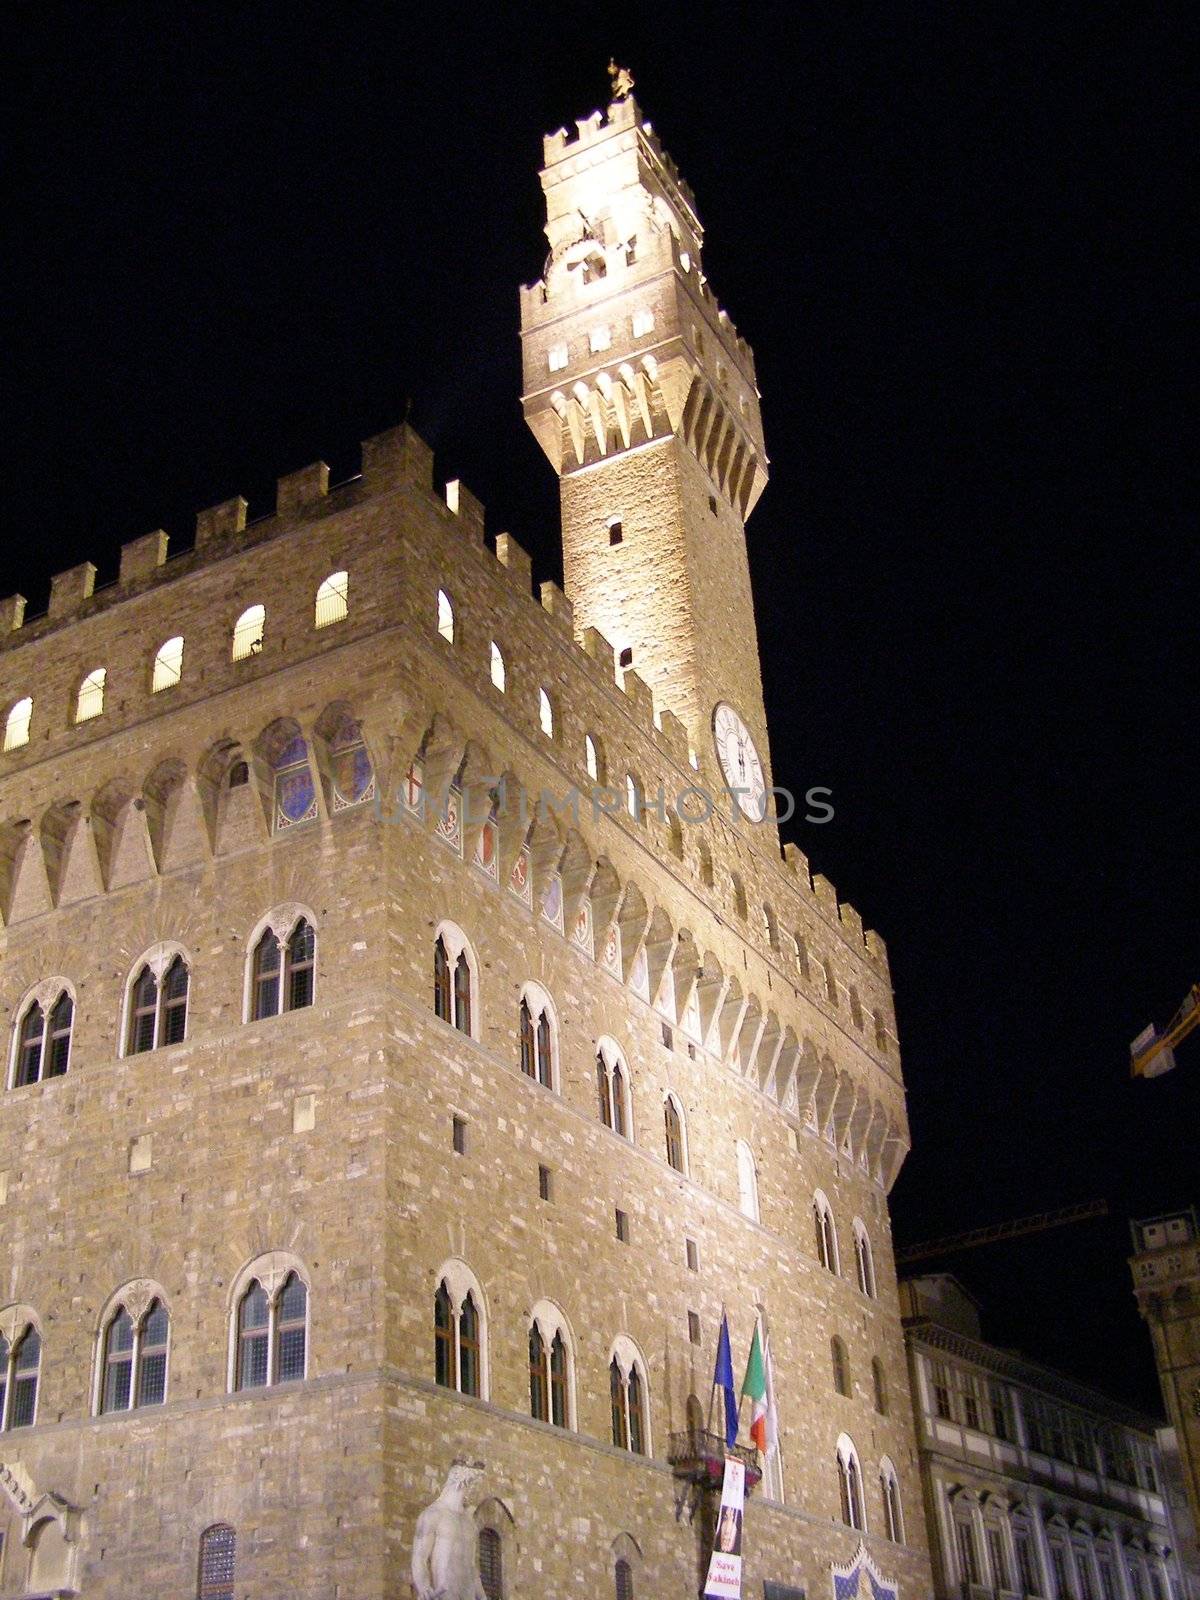 Palazzo Vecchio in Florence by night